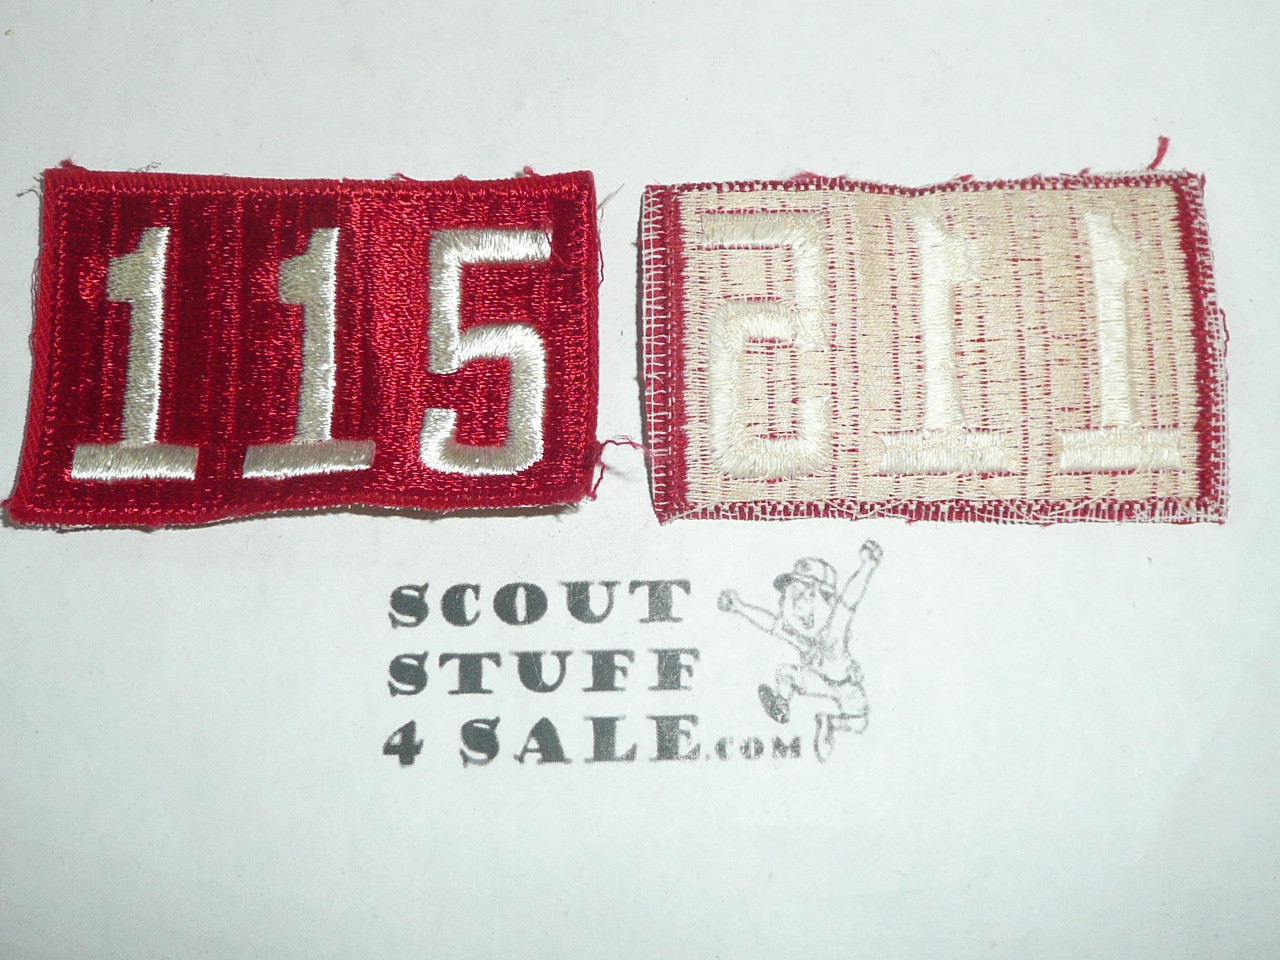 1970's Red Troop Numeral "115", fully embroidered, Unused